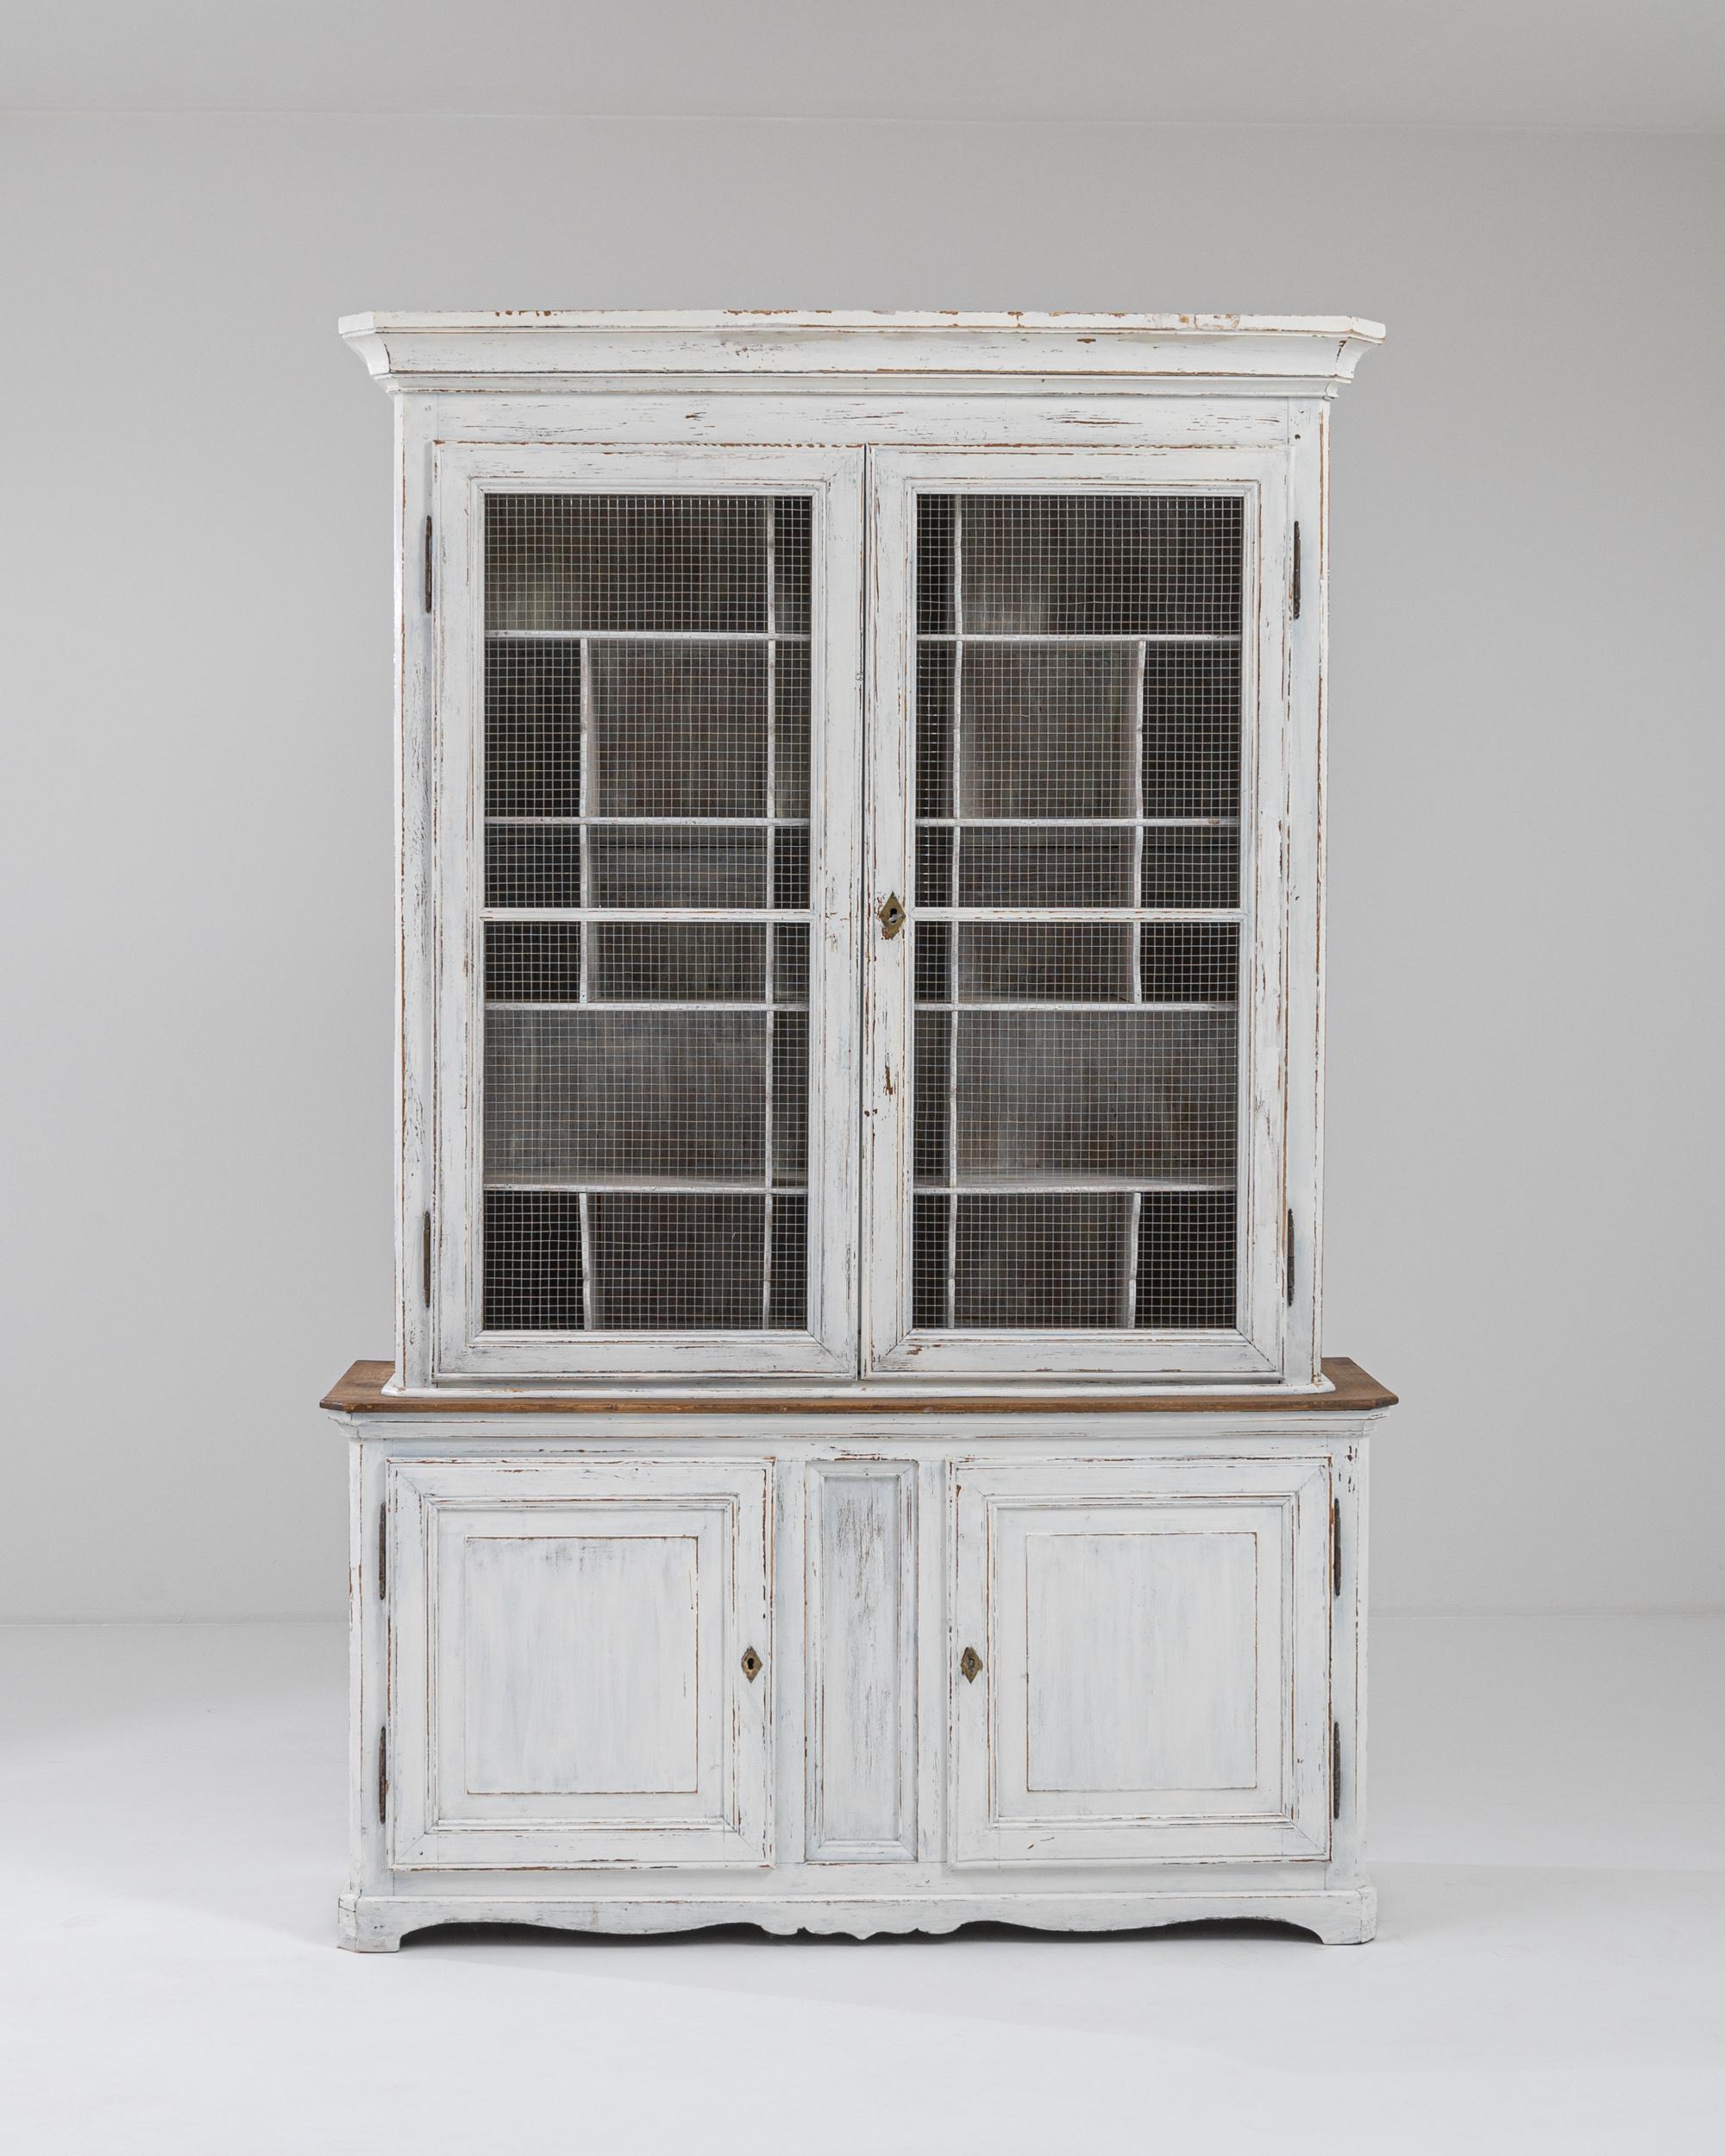 A wooden vitrine made in 1900s France. Featuring an array of cubbies in the upper cabinet, as well as two lower doors, this cabinet offers ample storage space. The upper doors are outfitted with a mesh screen, allowing for airflow. A pleasing patina